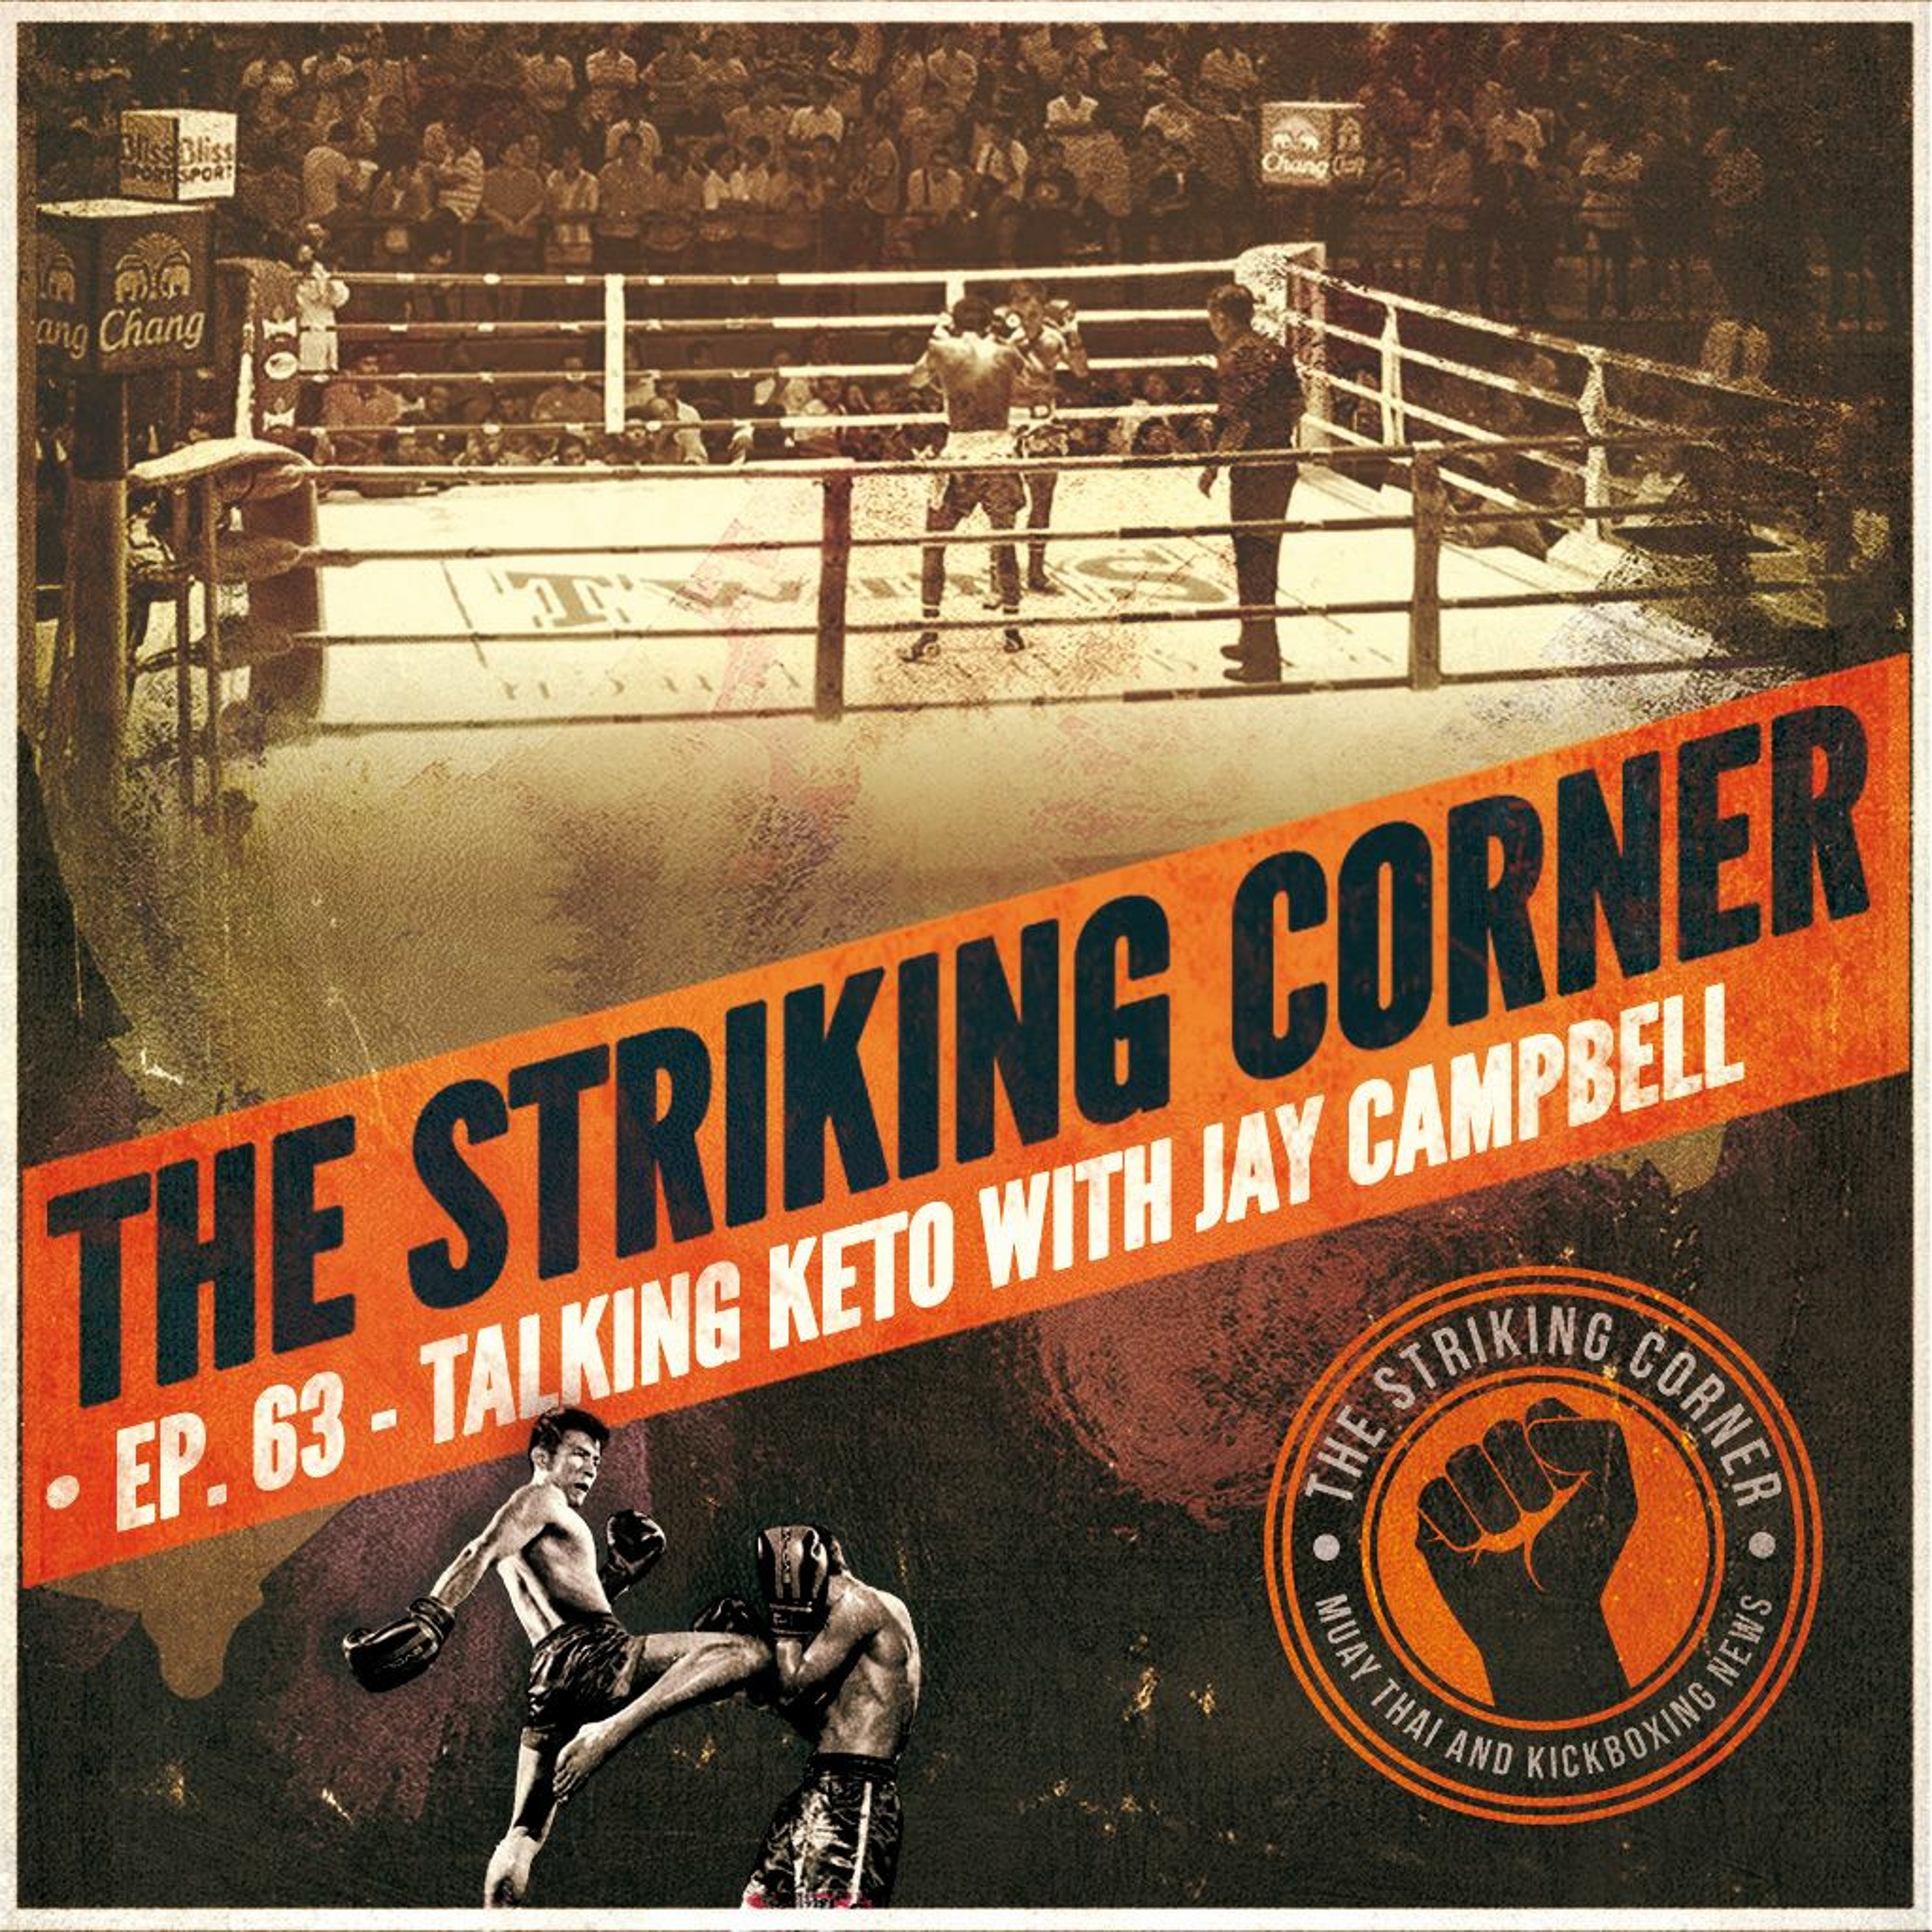 Ep. 63 feat. Jay Campbell